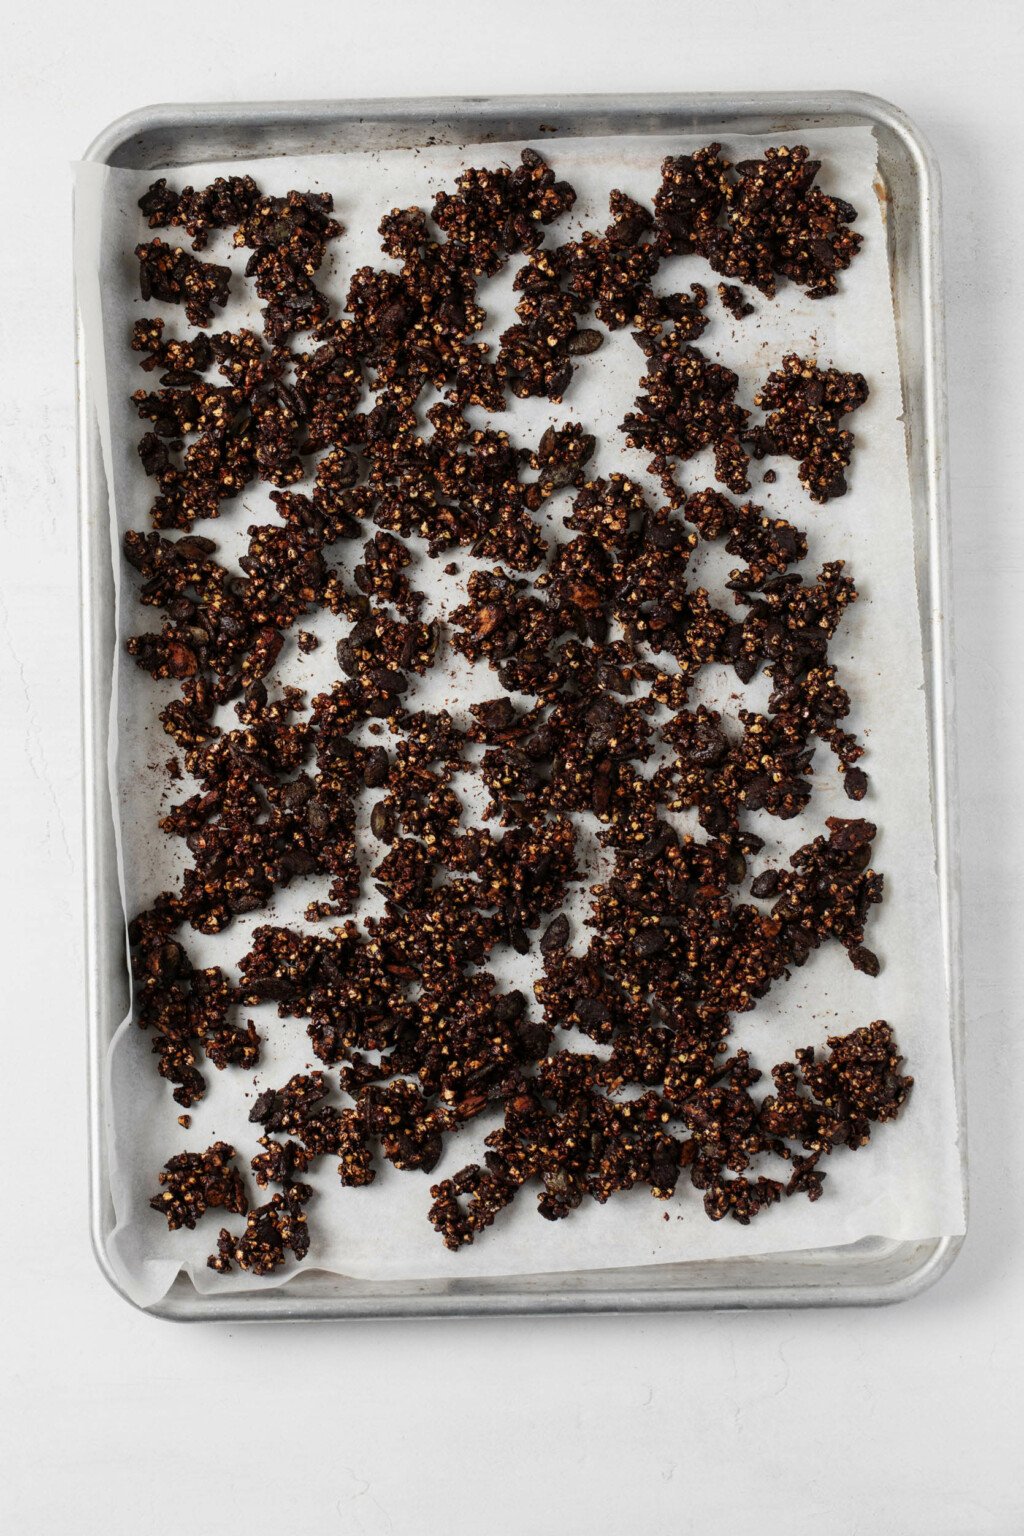 A baking sheet has been lined with parchment and is being used to bake cocoa-scented buckwheat granola clusters.